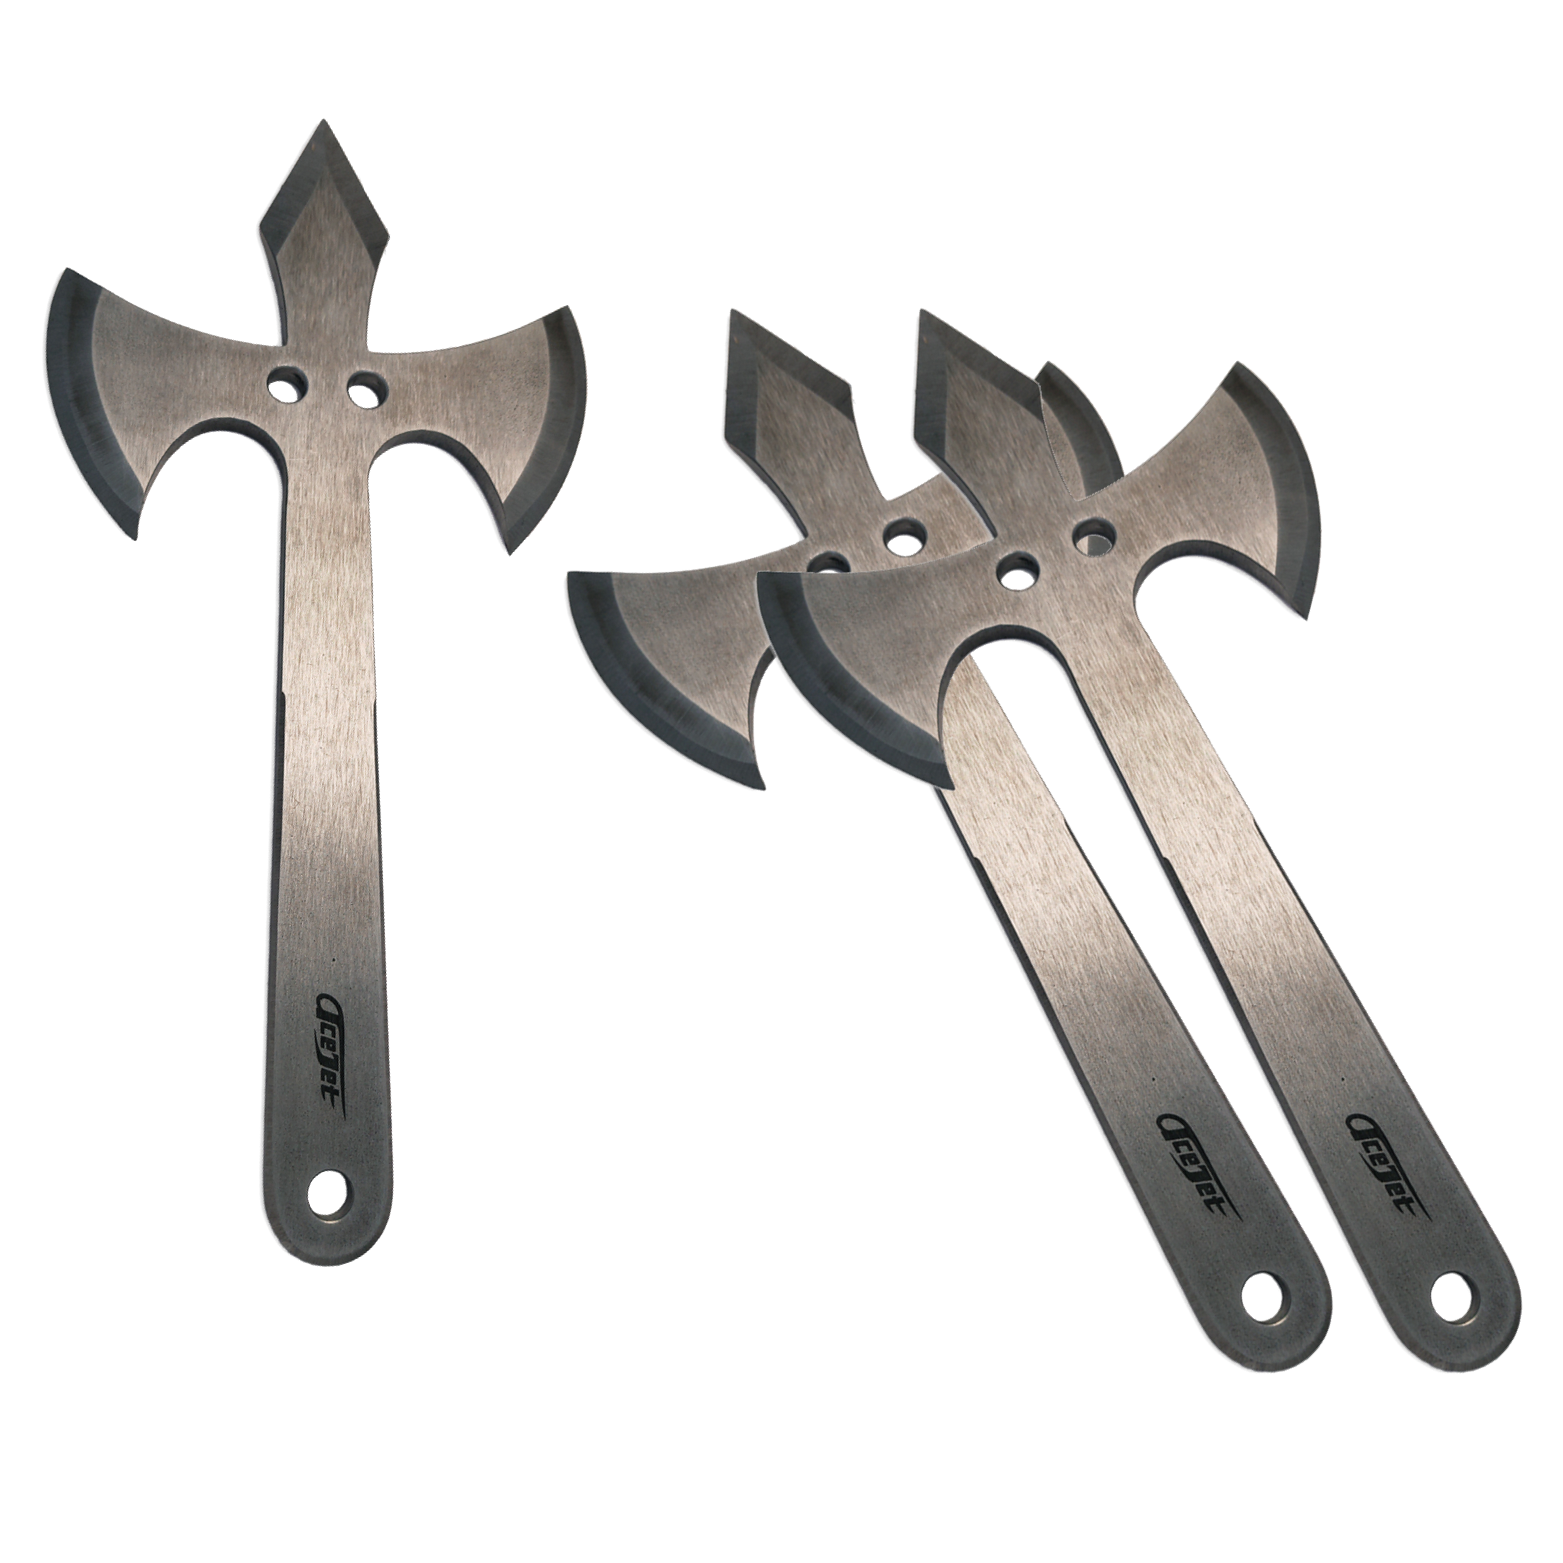 ACEJET AGILITY TRIDENT - throwing axe set of 3